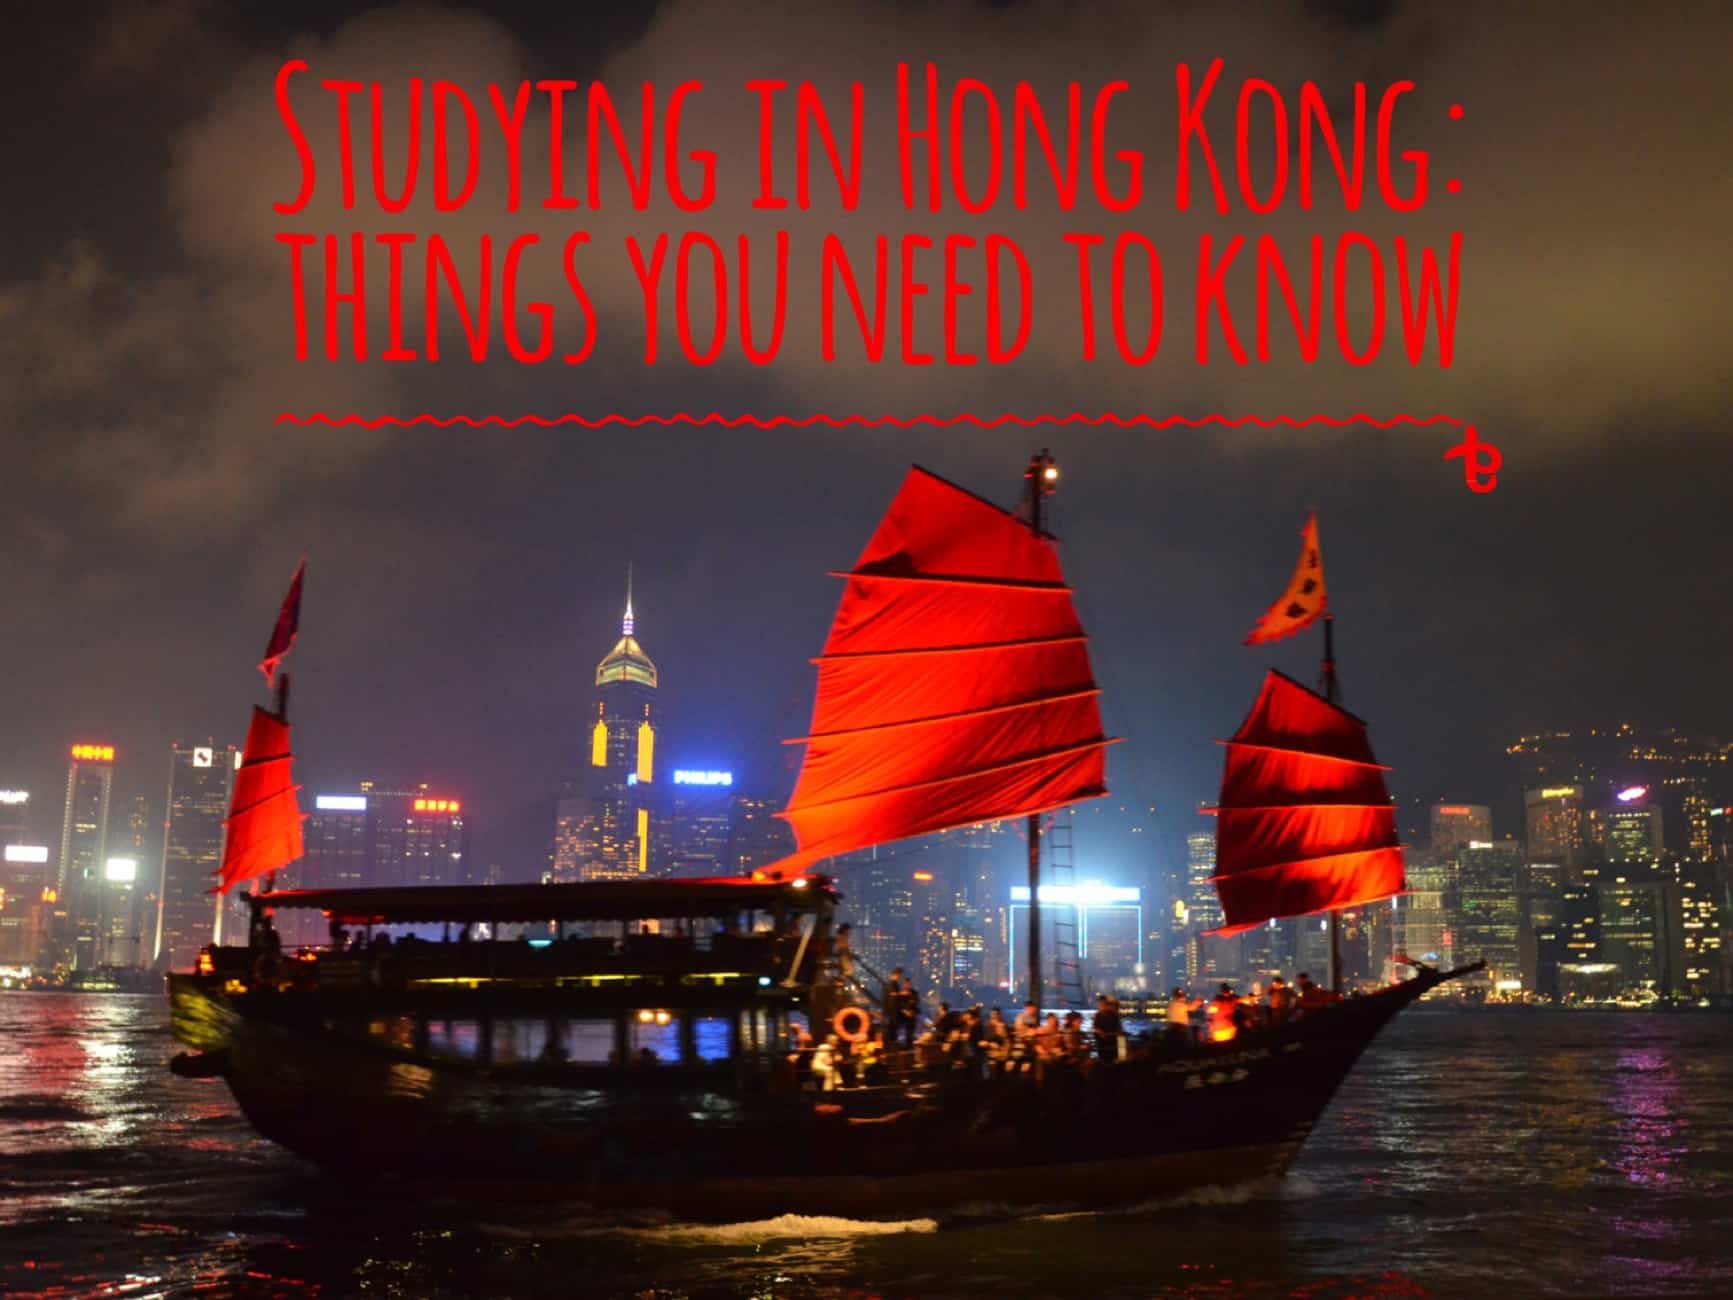 11 things you need to know if you’re going to study in Hong Kong